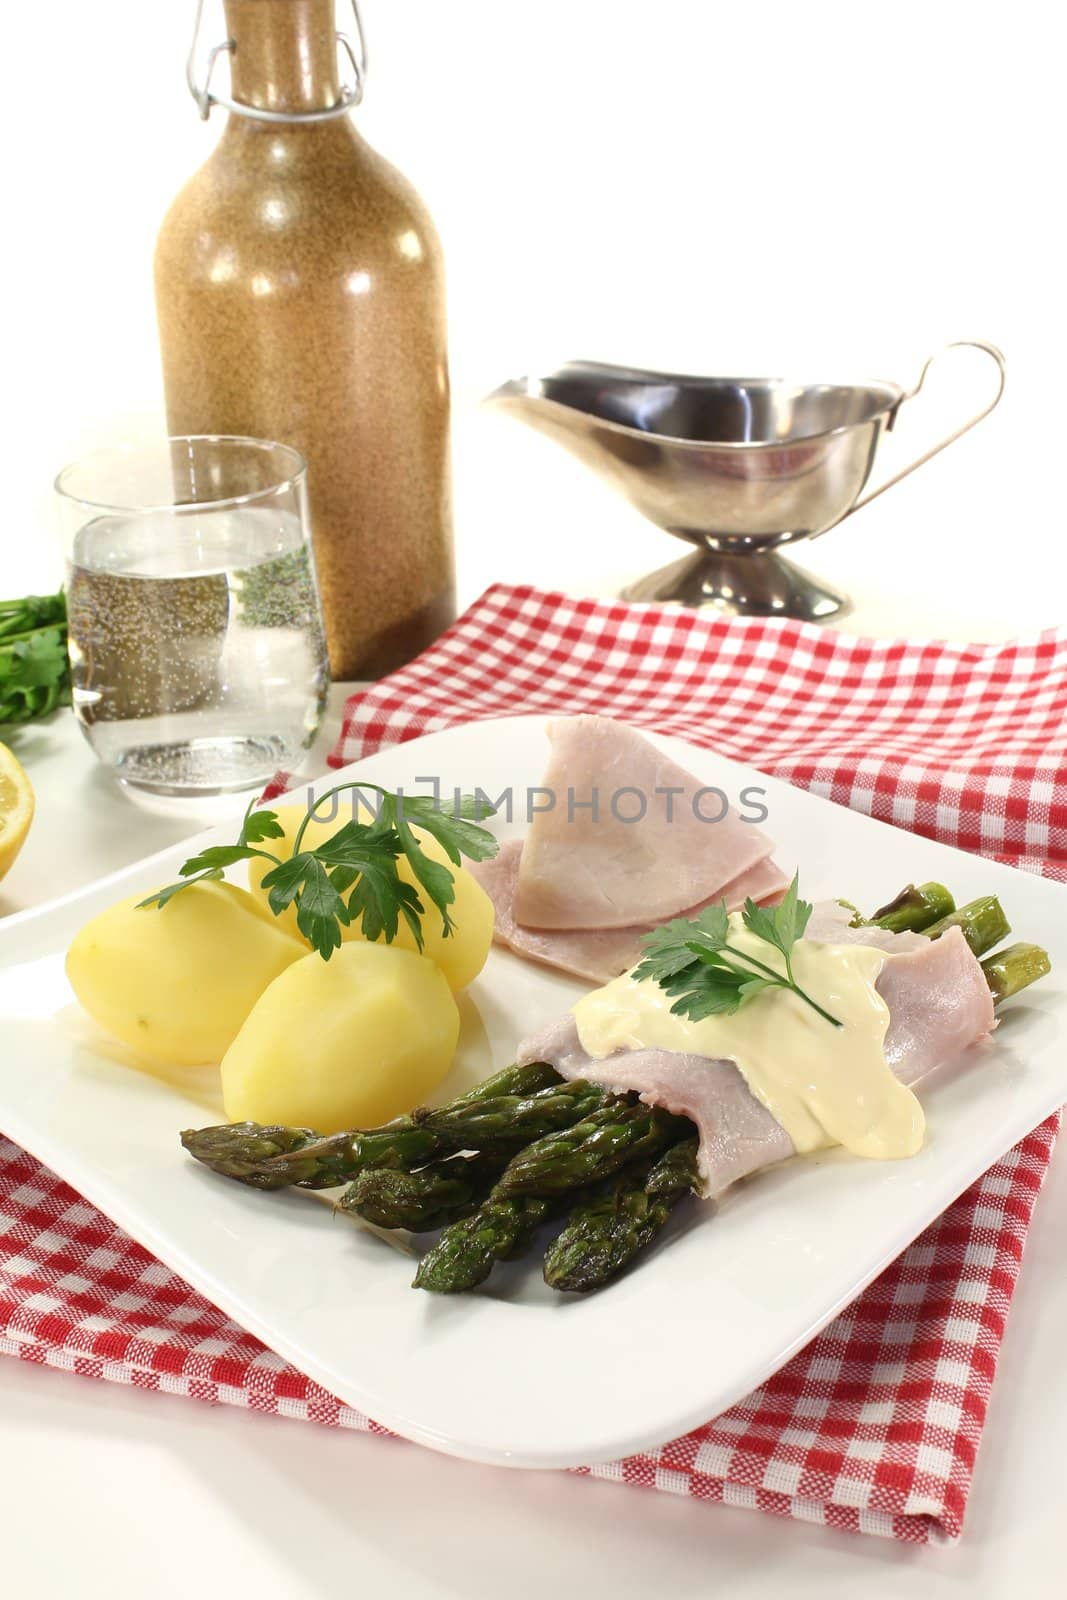 Asparagus with hollandaise sauce and parsley by discovery